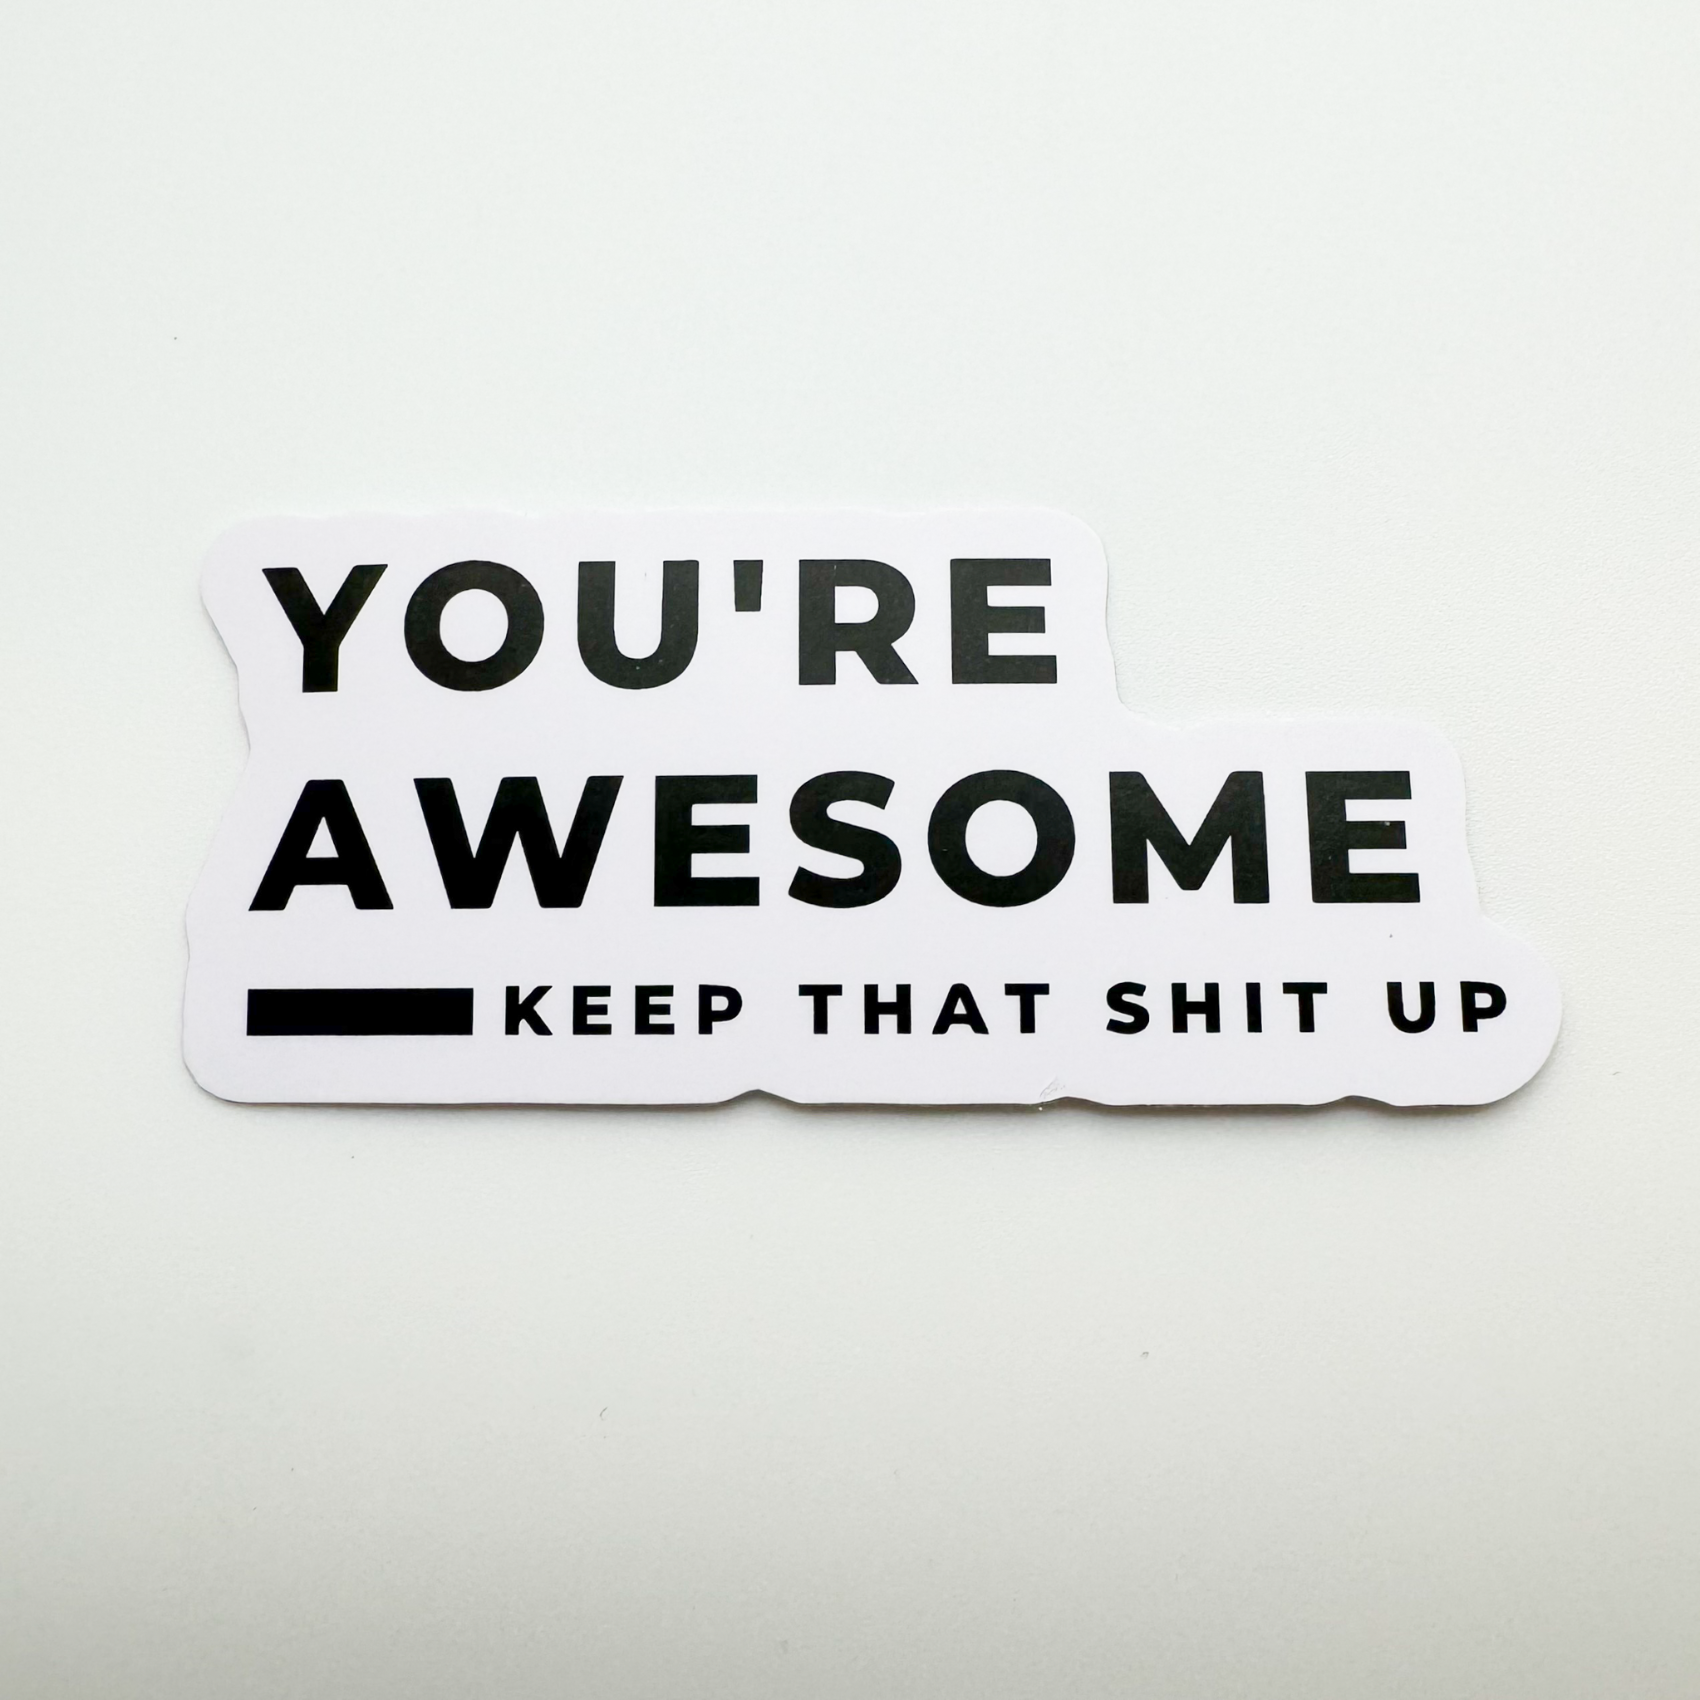 white vinyl motivational sticker "You're awesome, keep that shit up"